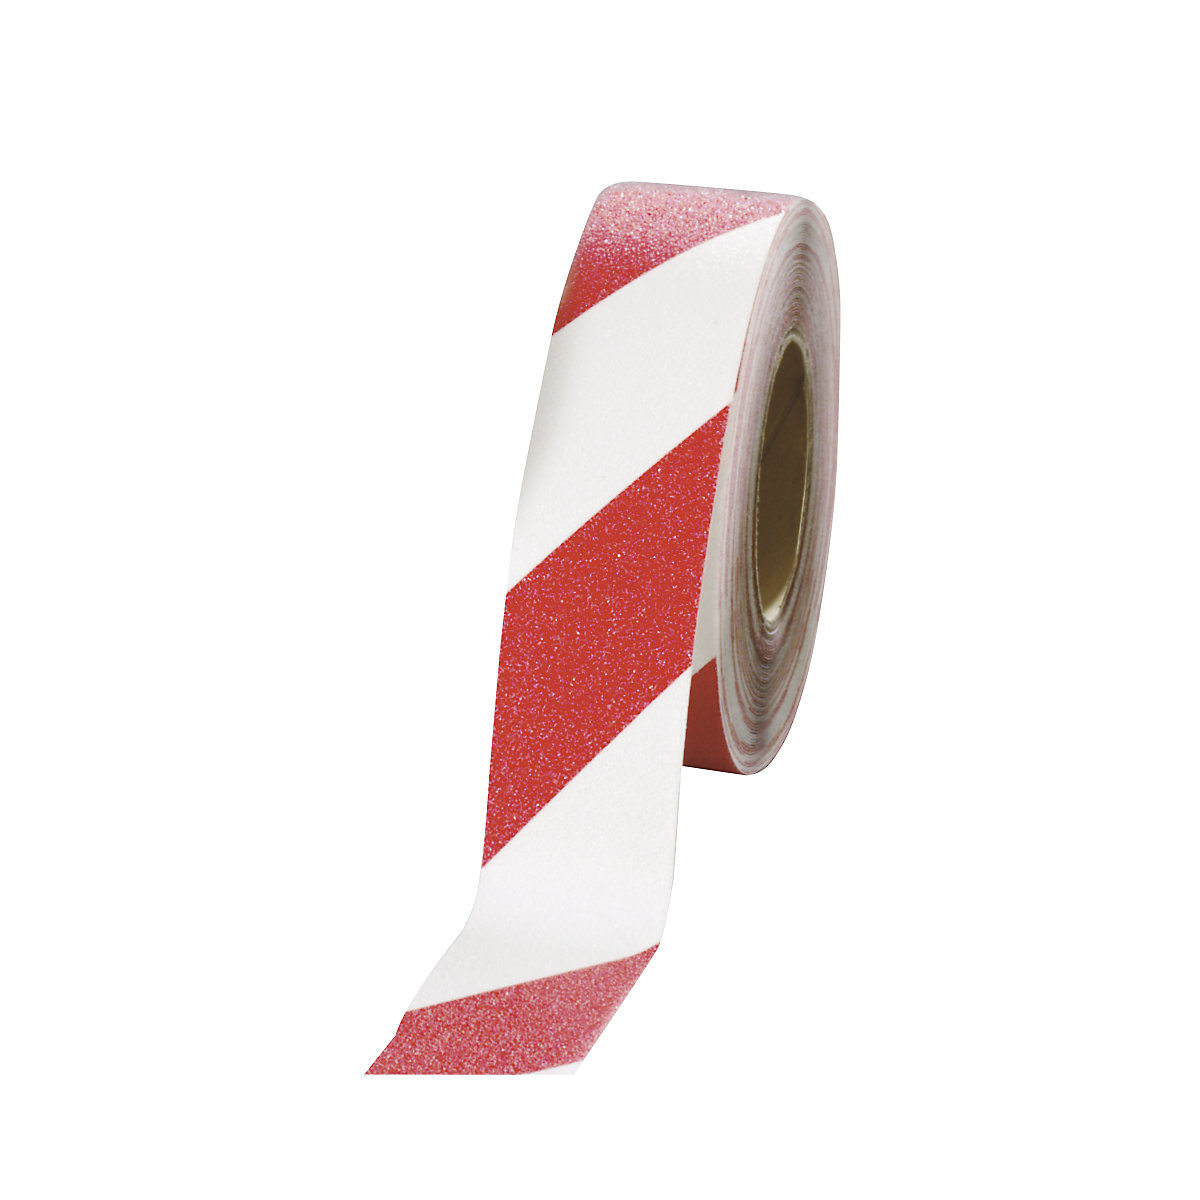 Non-slip tape, self-adhesive, width 50 mm, red/white, roll, 3+ items